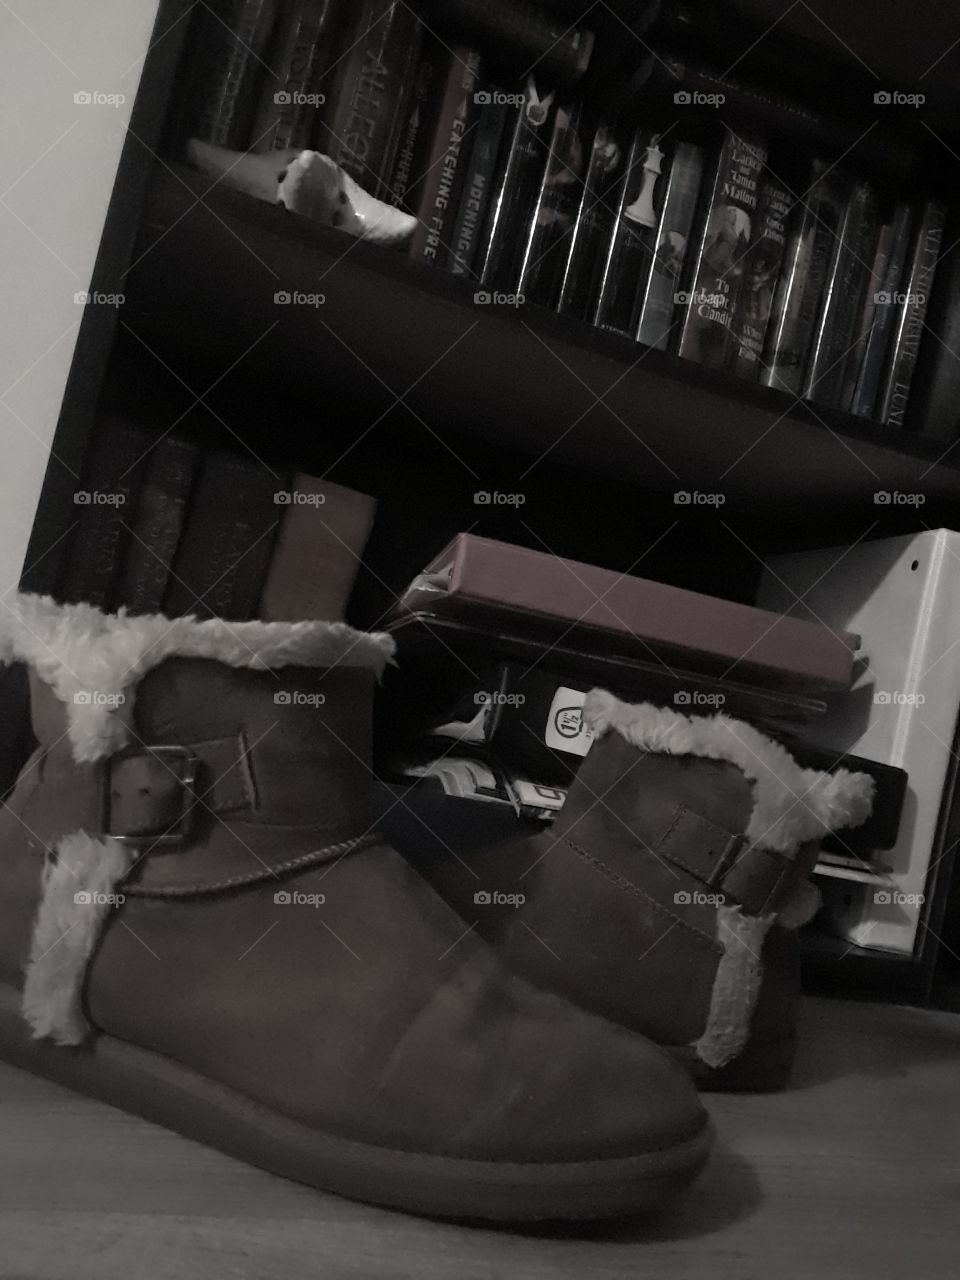 ugg boots and books = happy